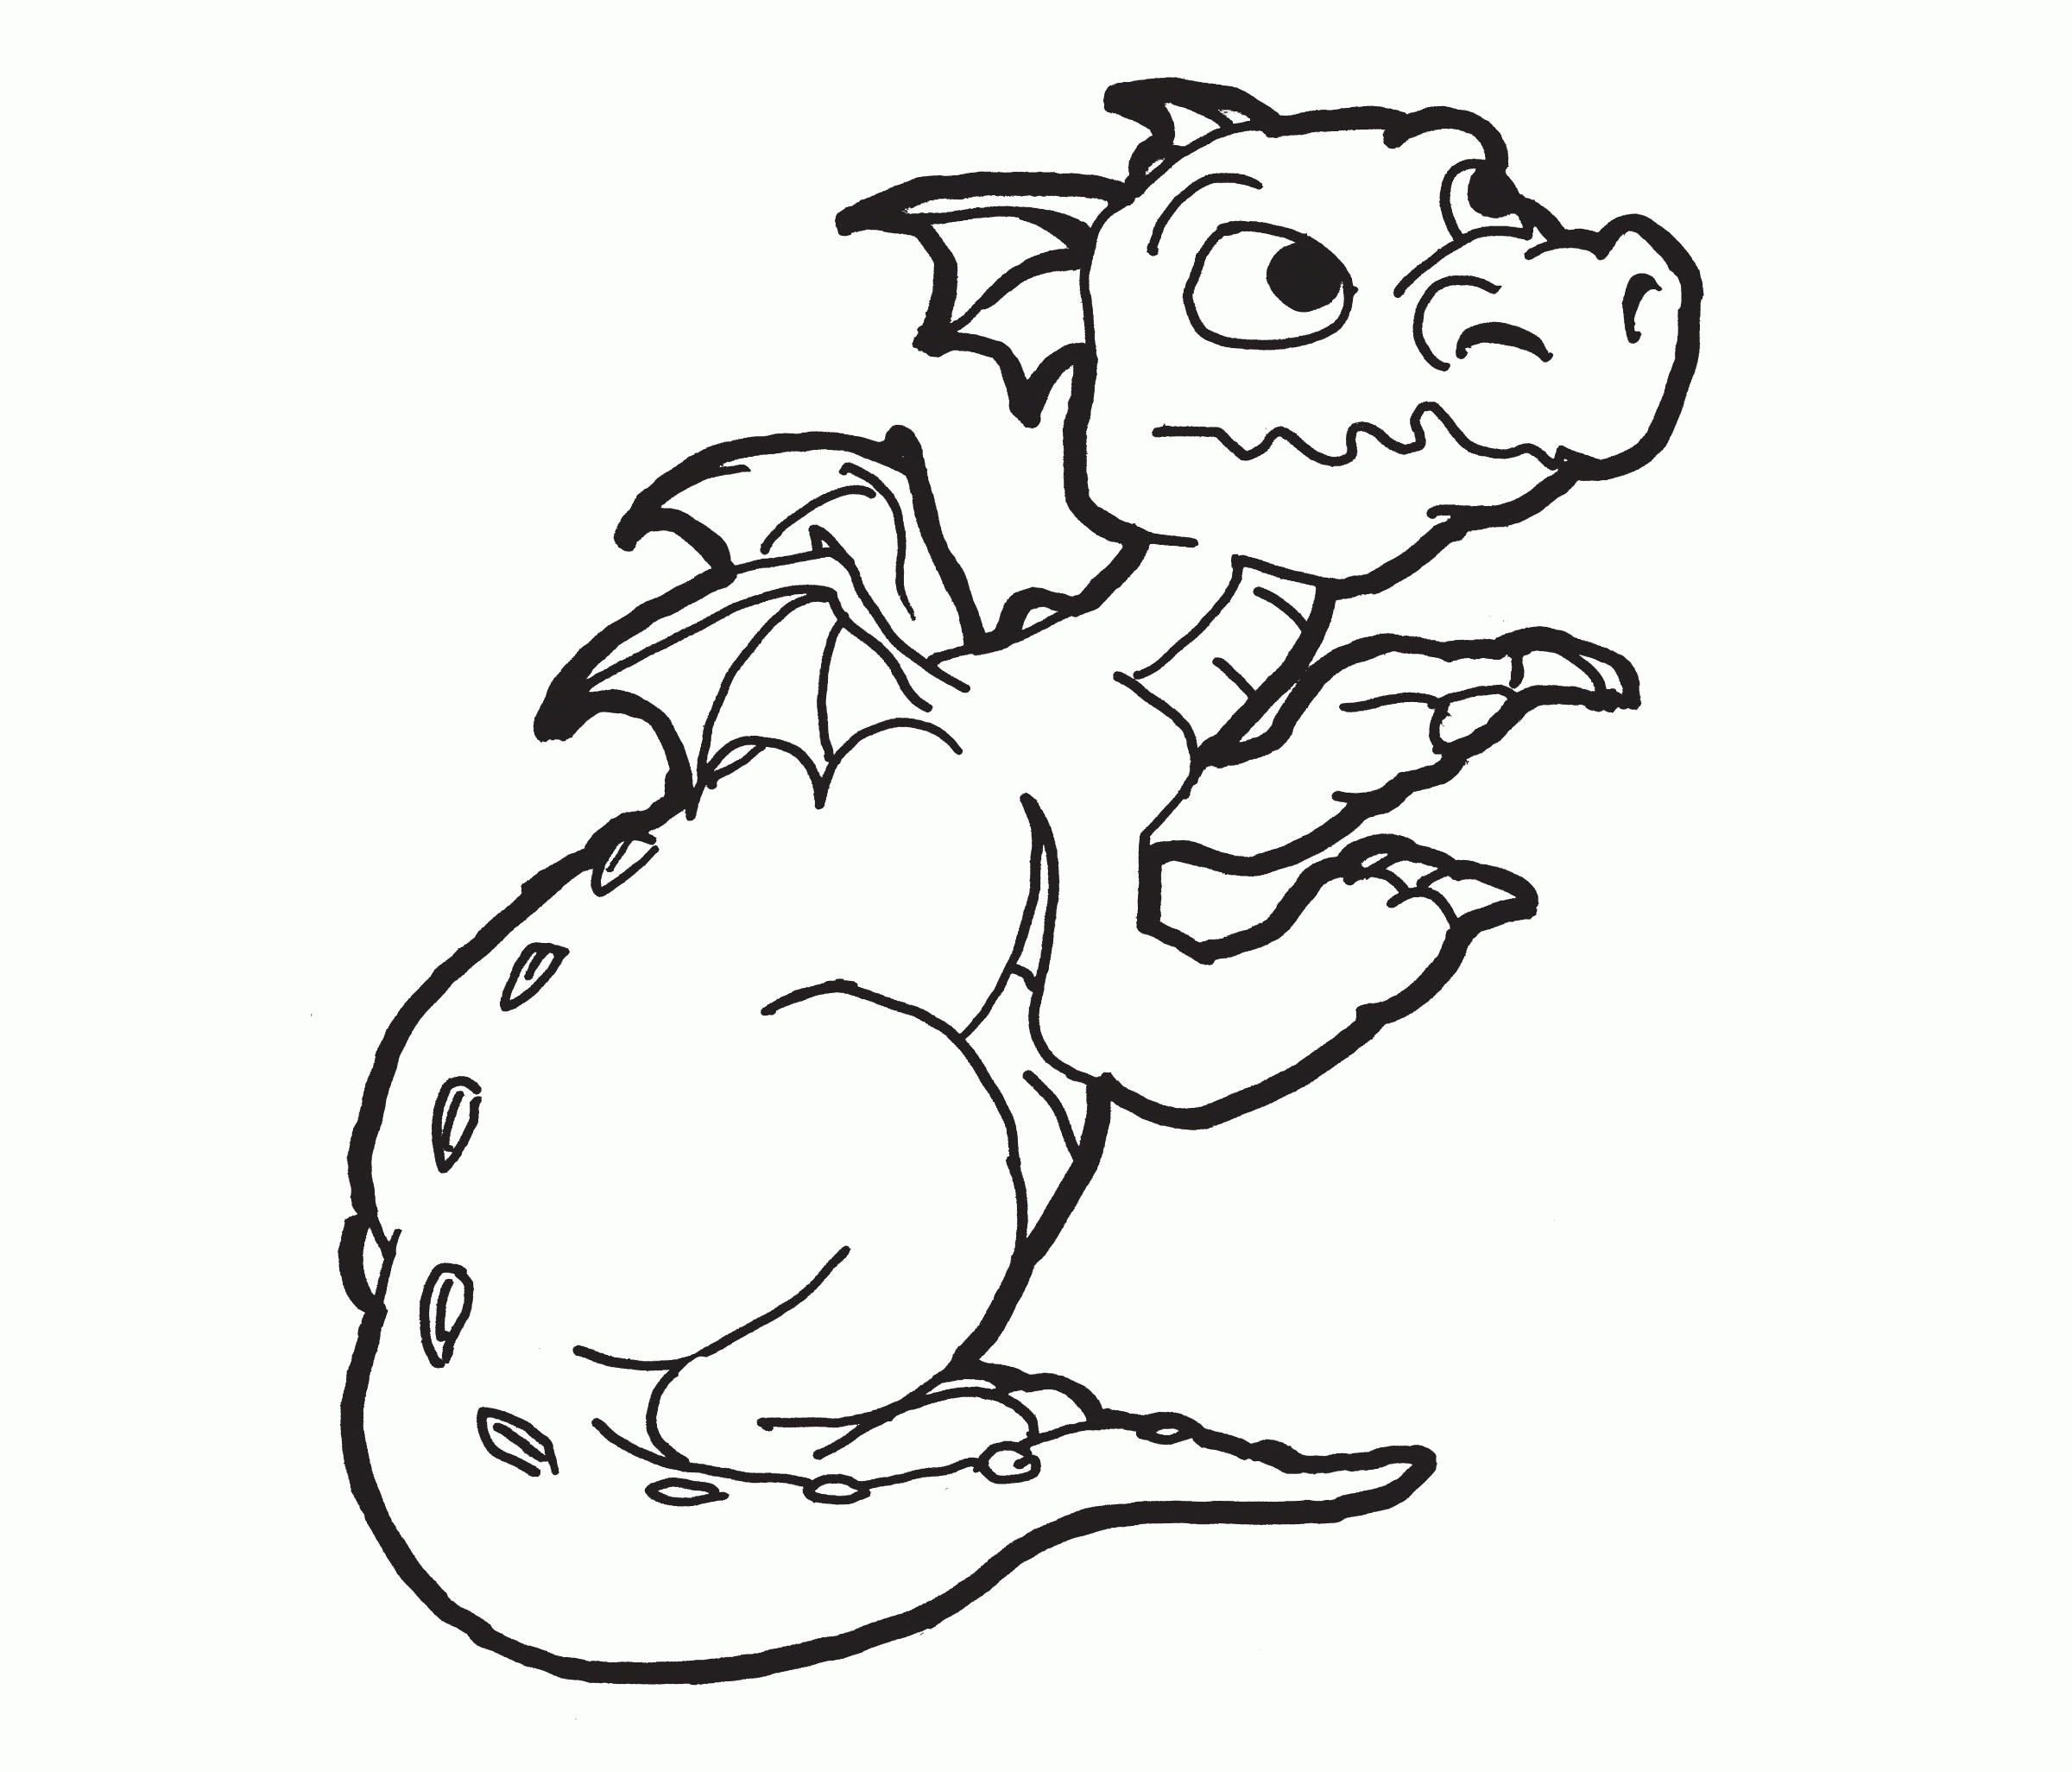 Coloring Page Of A Dragon